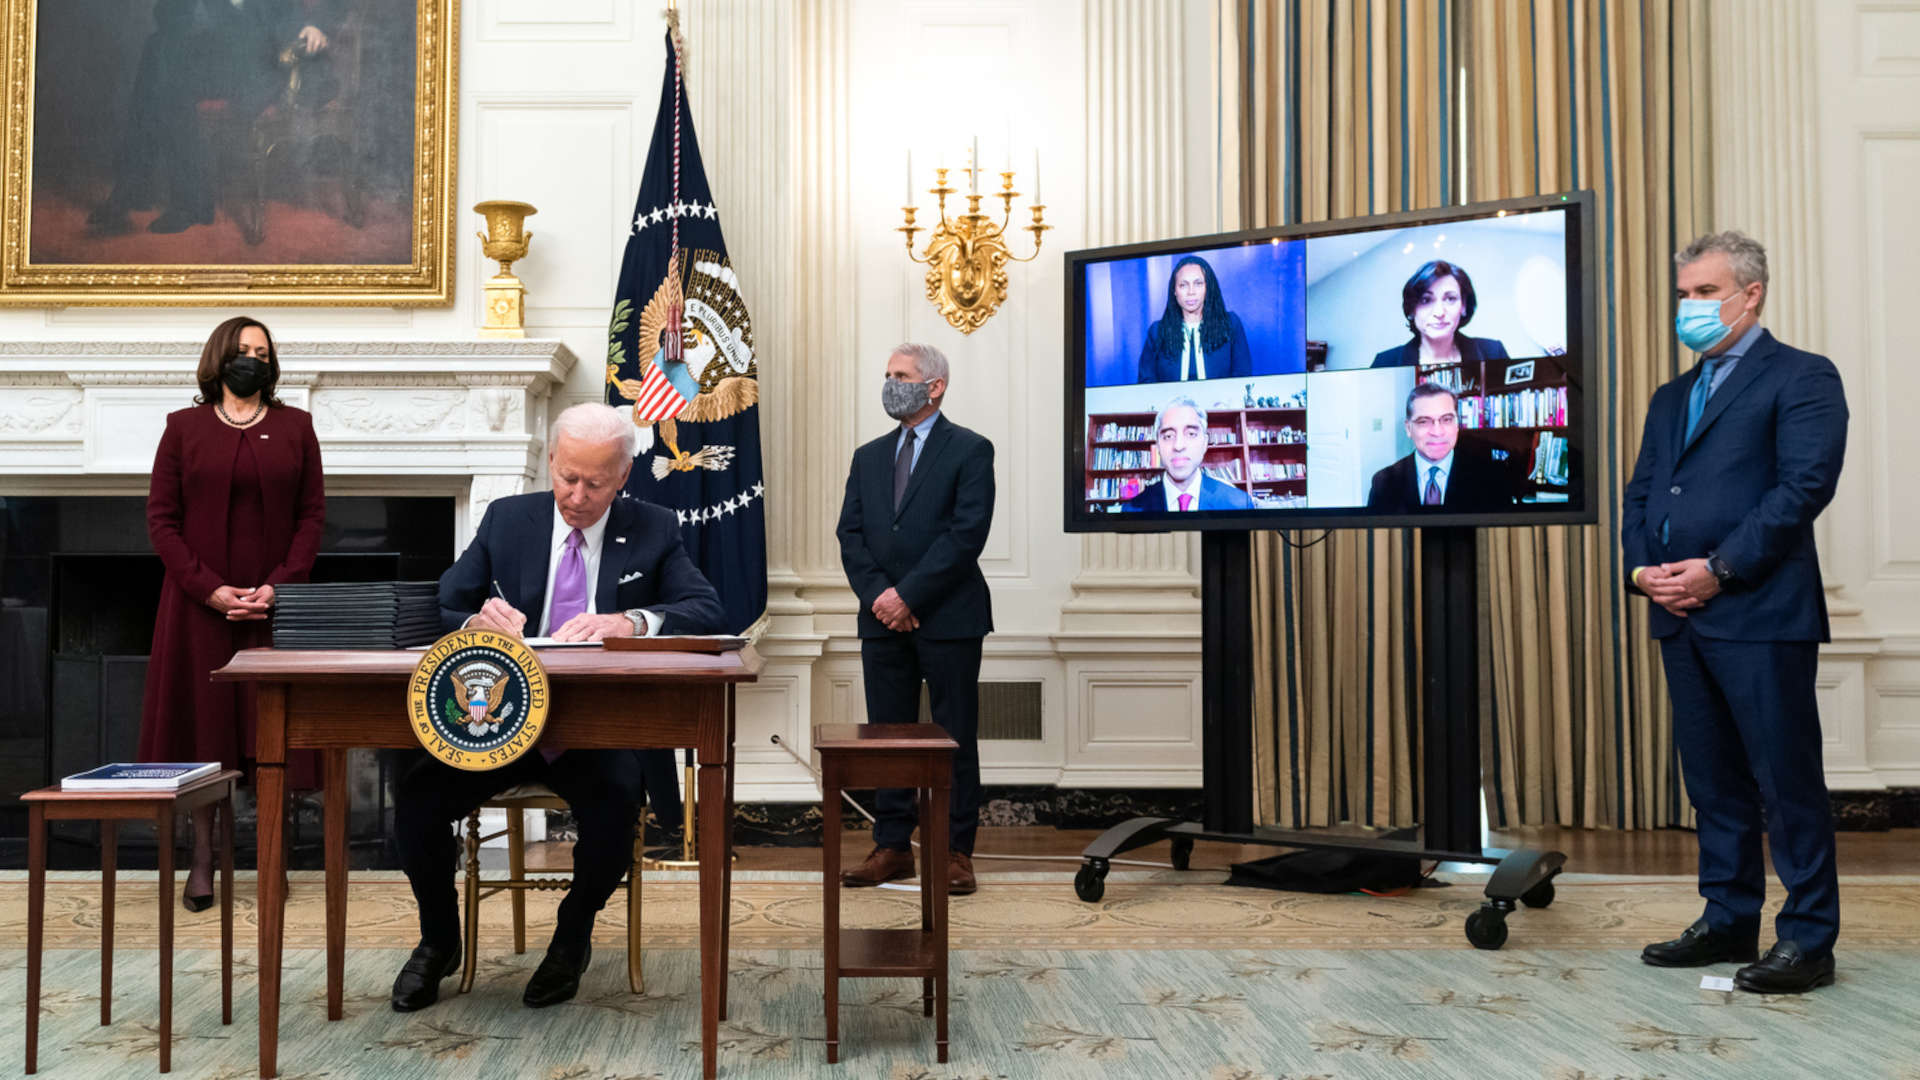 President Joe Biden, joined by Vice President Kamala Harris, Anthony Fauci, and Jeff Zients signs an executive order on Establishing the Covid-19 Pandemic Testing Board.